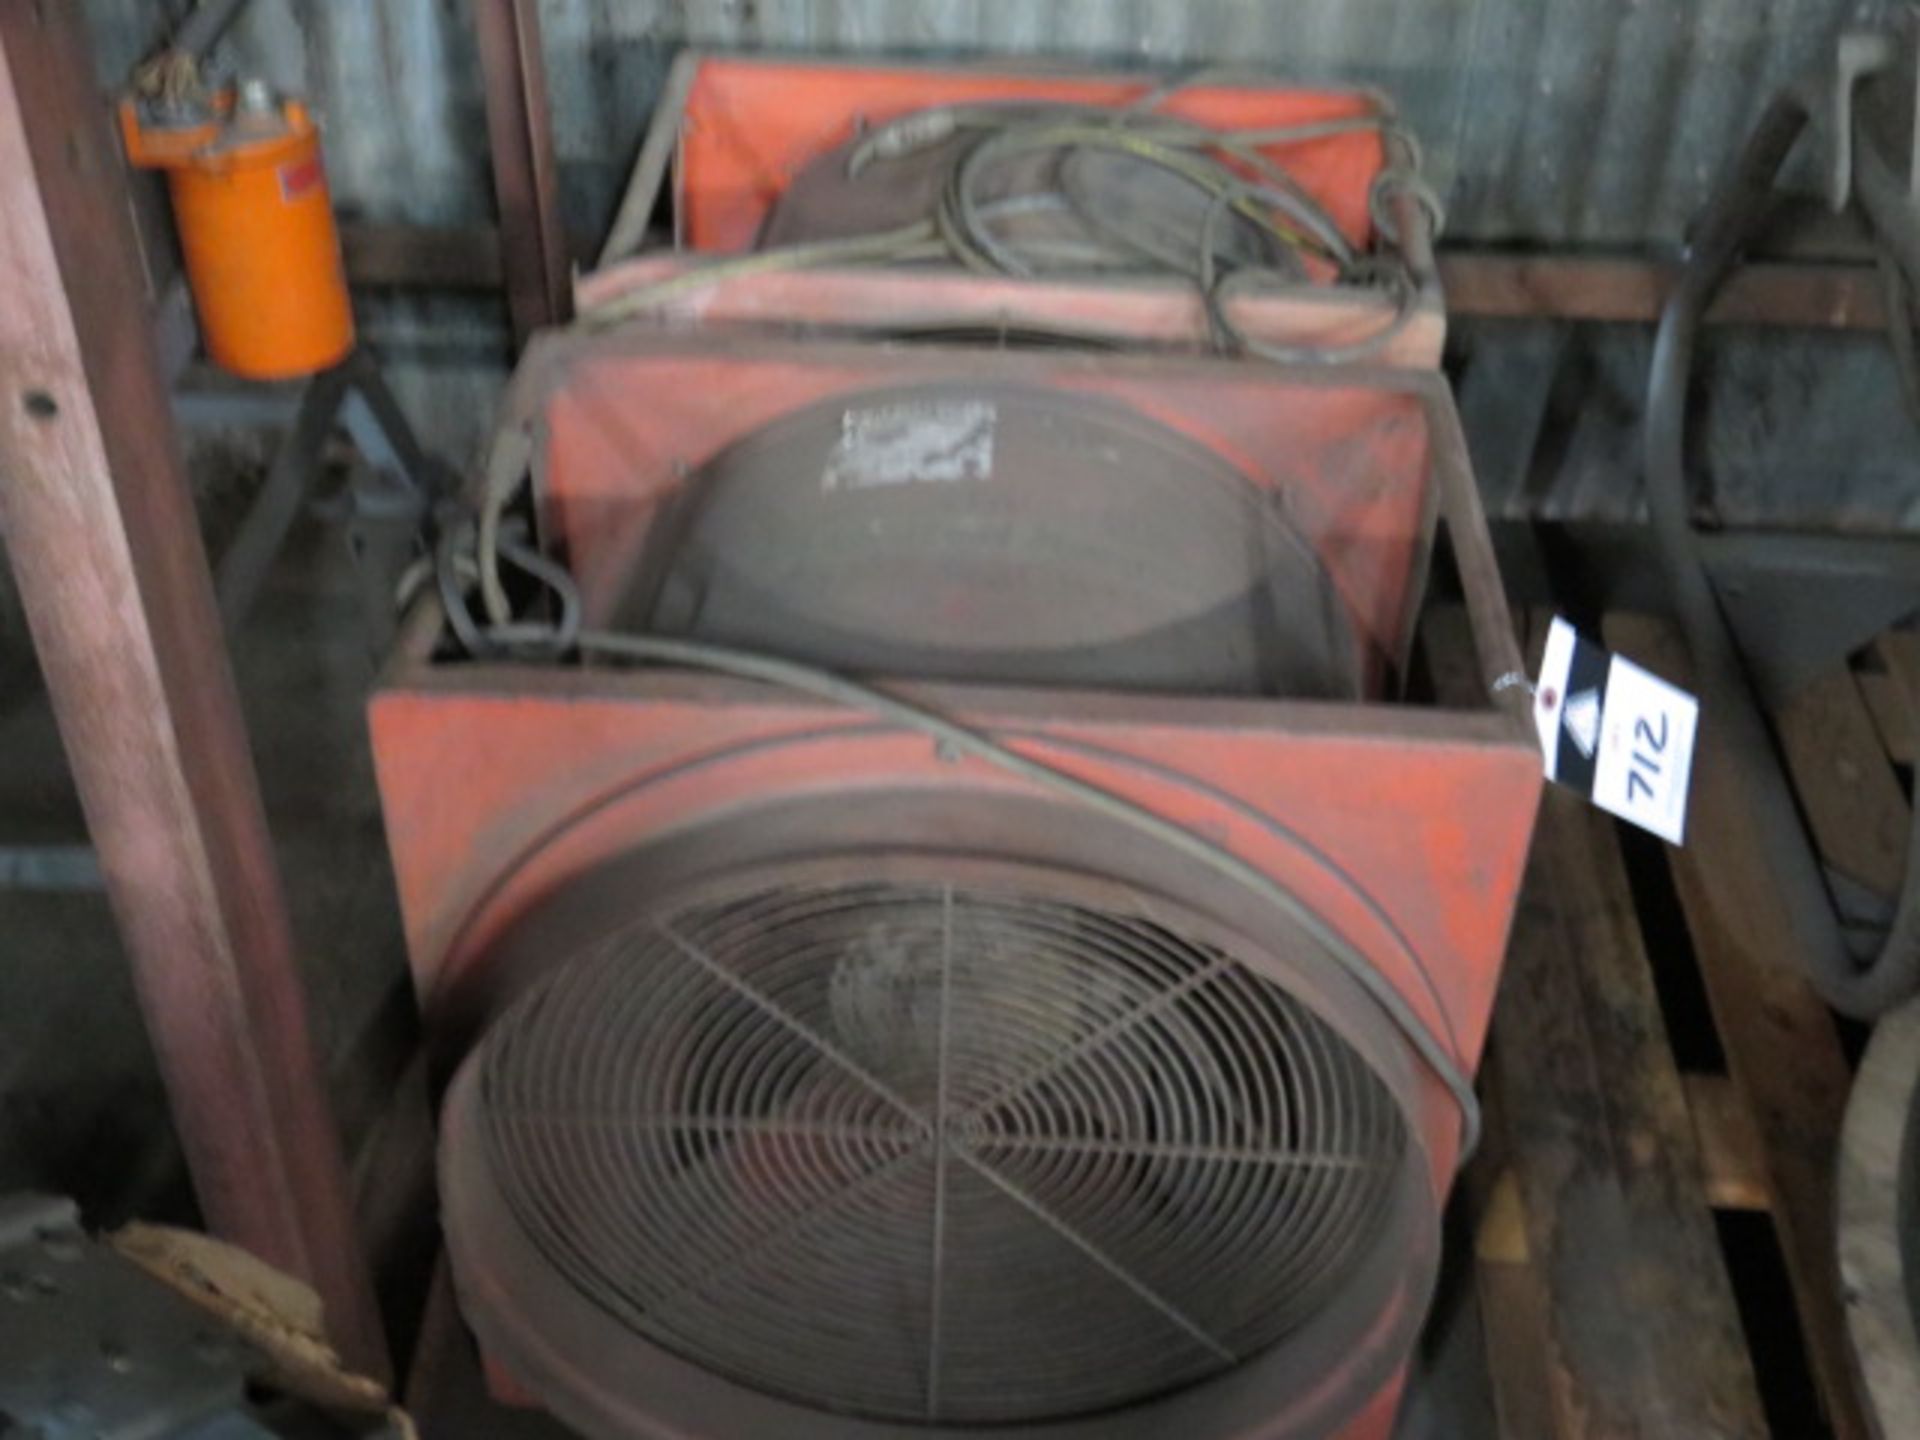 Shop Fans (3) (SOLD AS -IS - NO WARANTY) - Image 3 of 5